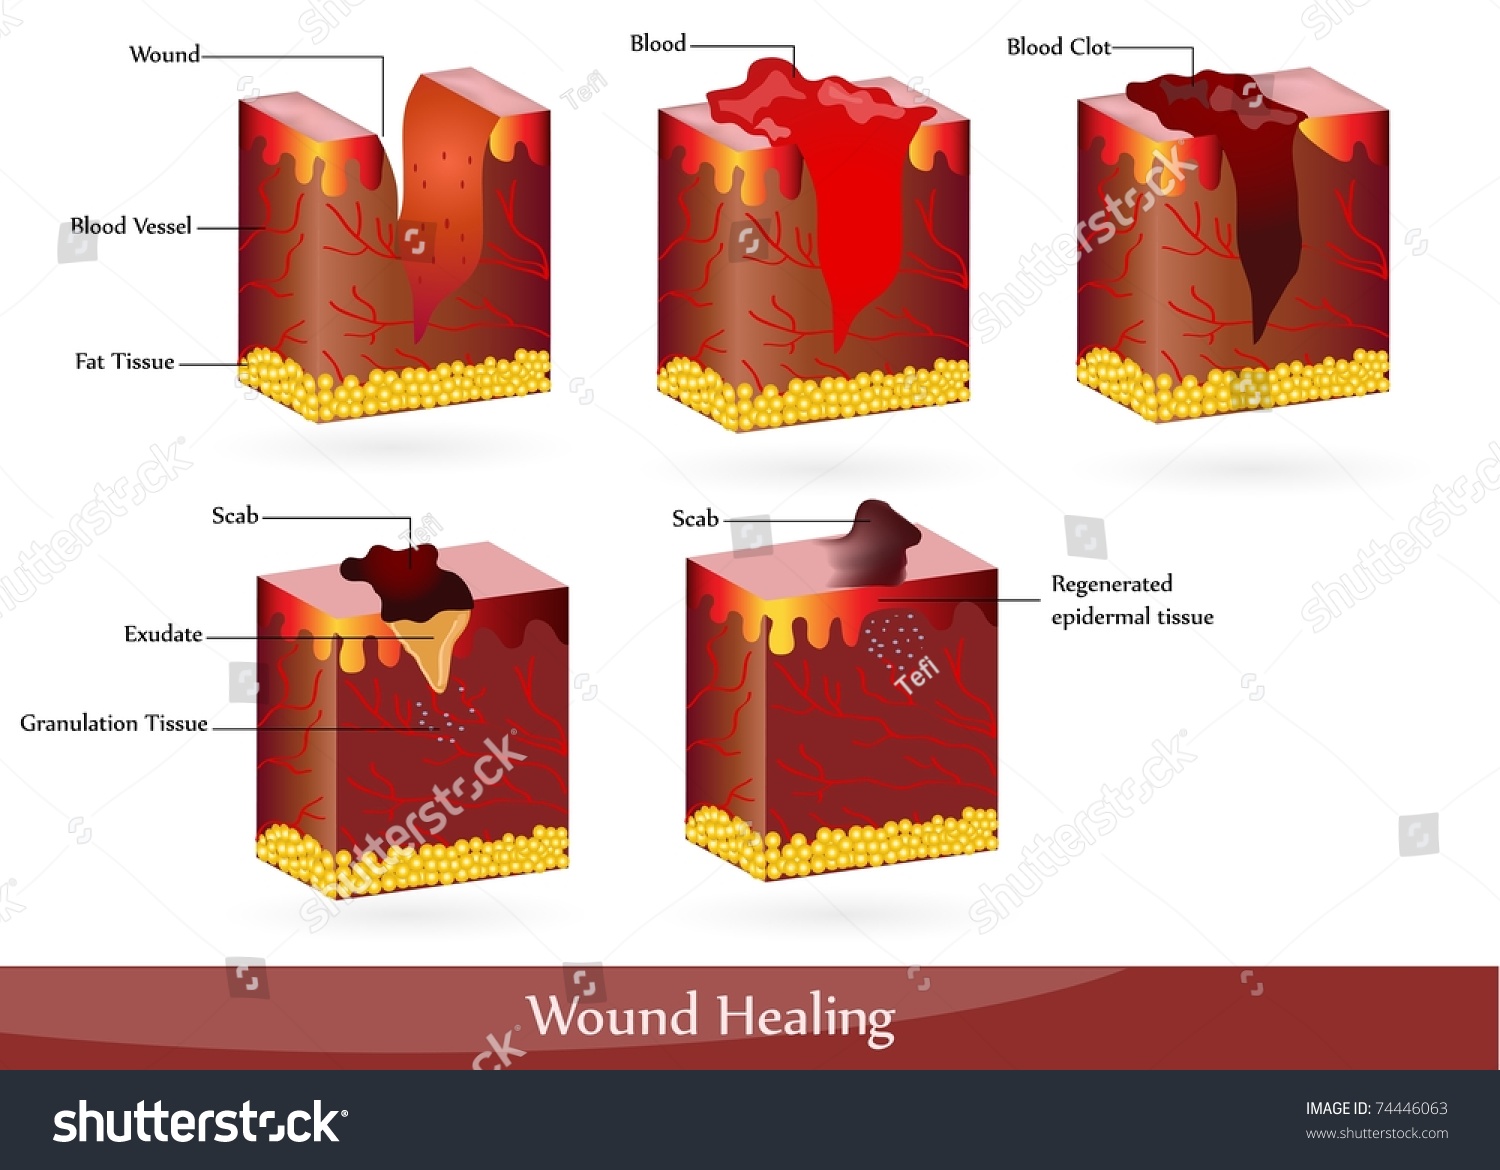 Wound Healing Illustration Showing Skin After Stock Vector